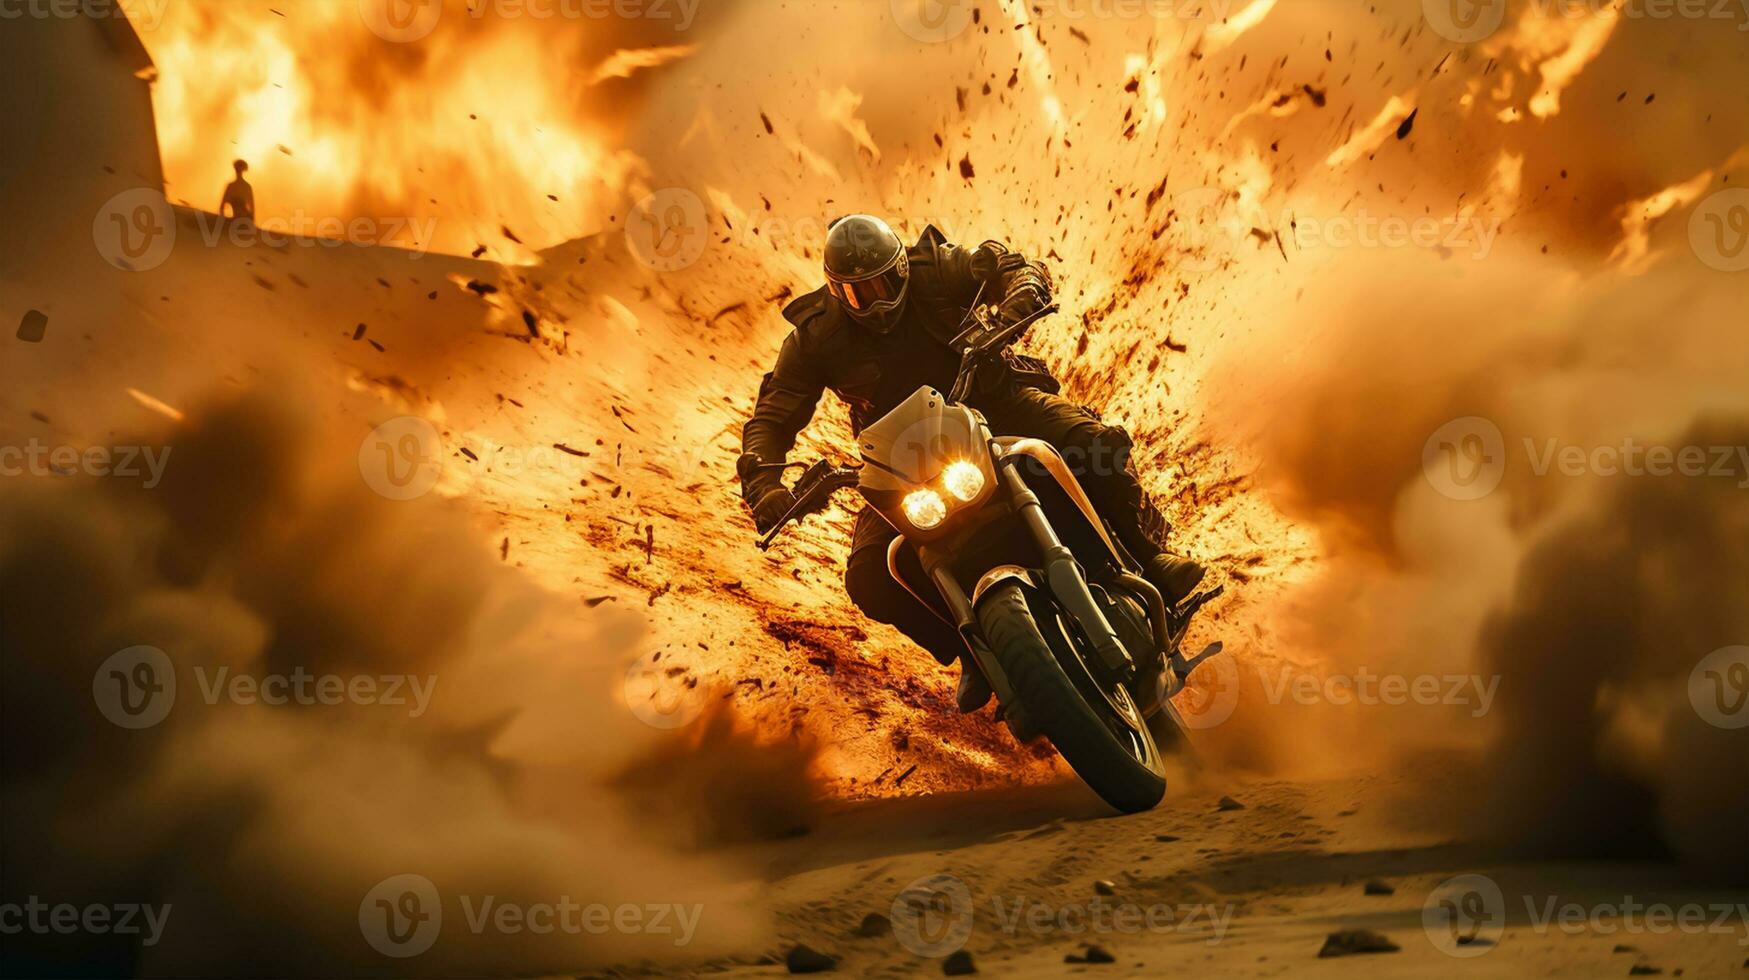 Racing motorcycle in flames. Motorcyclist on a motorcycle in smoke. photo